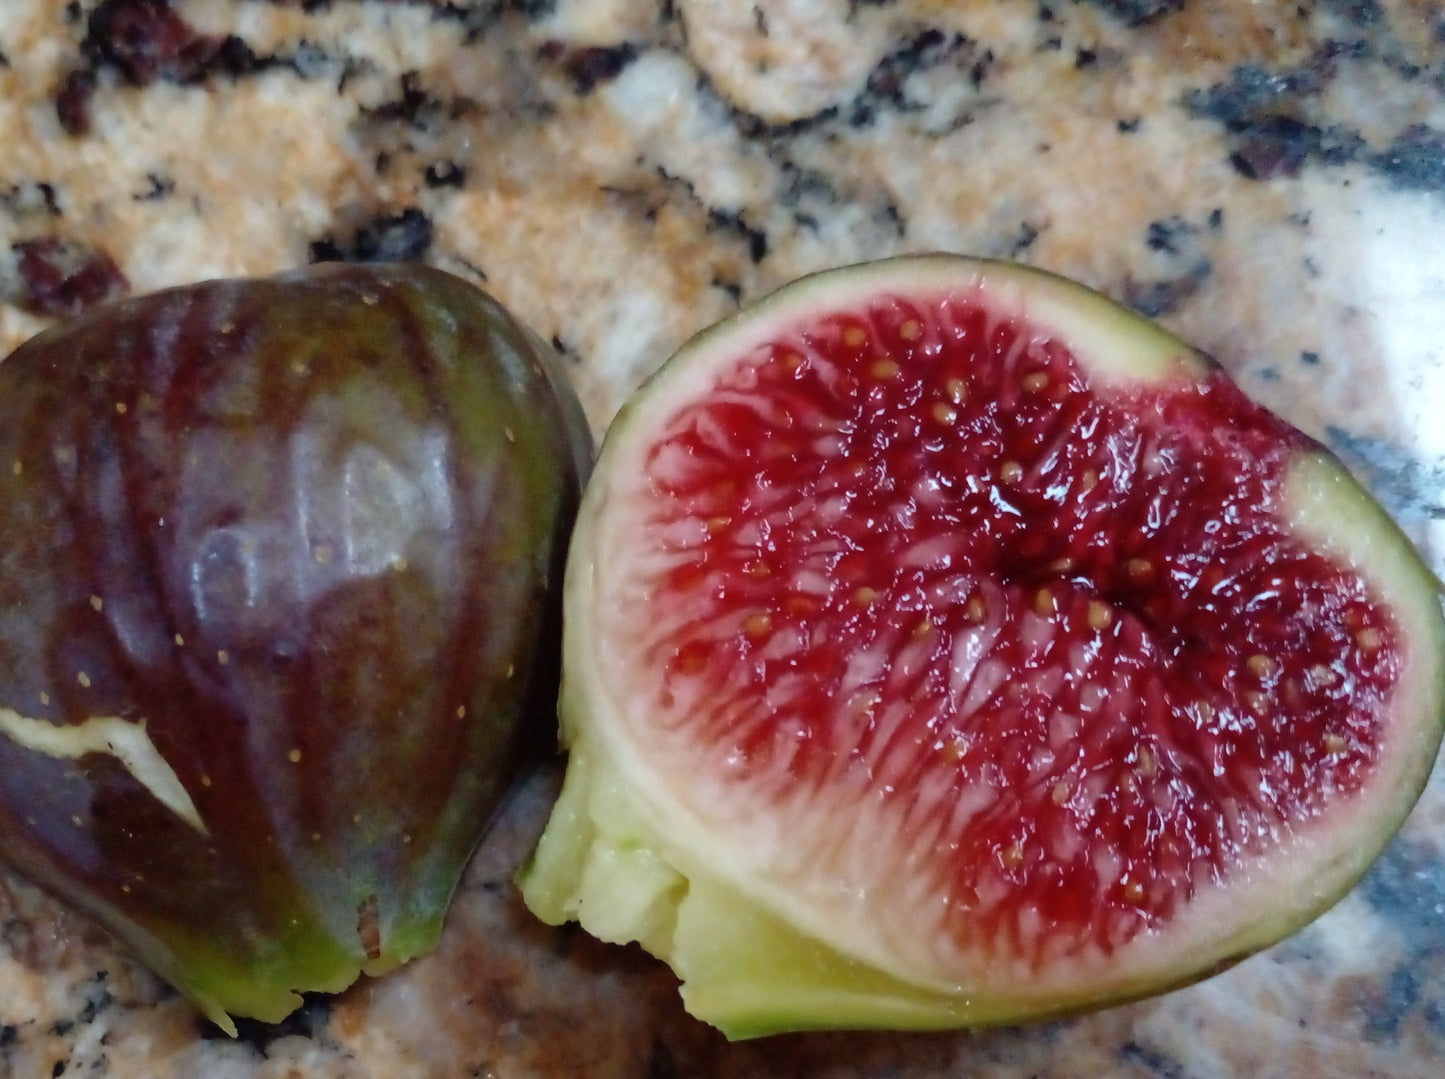 Texas BA-1 Fig - 2 Cuttings - Bronze Figs with Sweet Strawberry Flavor